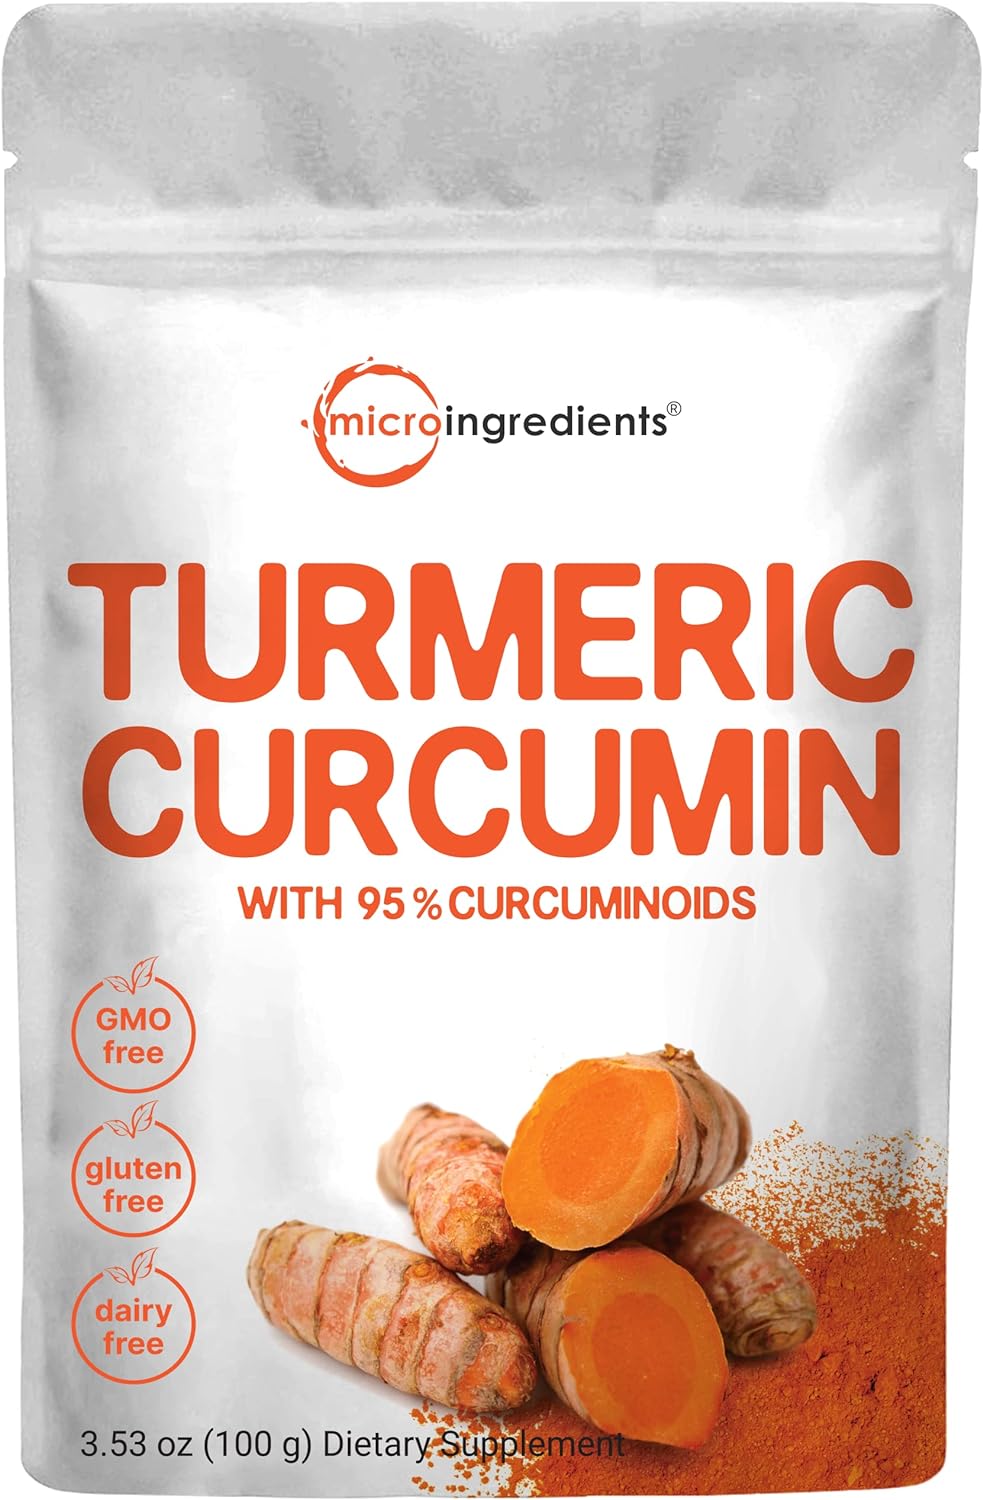 Turmeric Extract 95% Curcuminoids (Natural Turmeric Extract and Turmeric Supplements), 100 Grams, Rich in Antioxidants for Joint & Immune Support, No GMOs, Vegan Friendly, India Origin